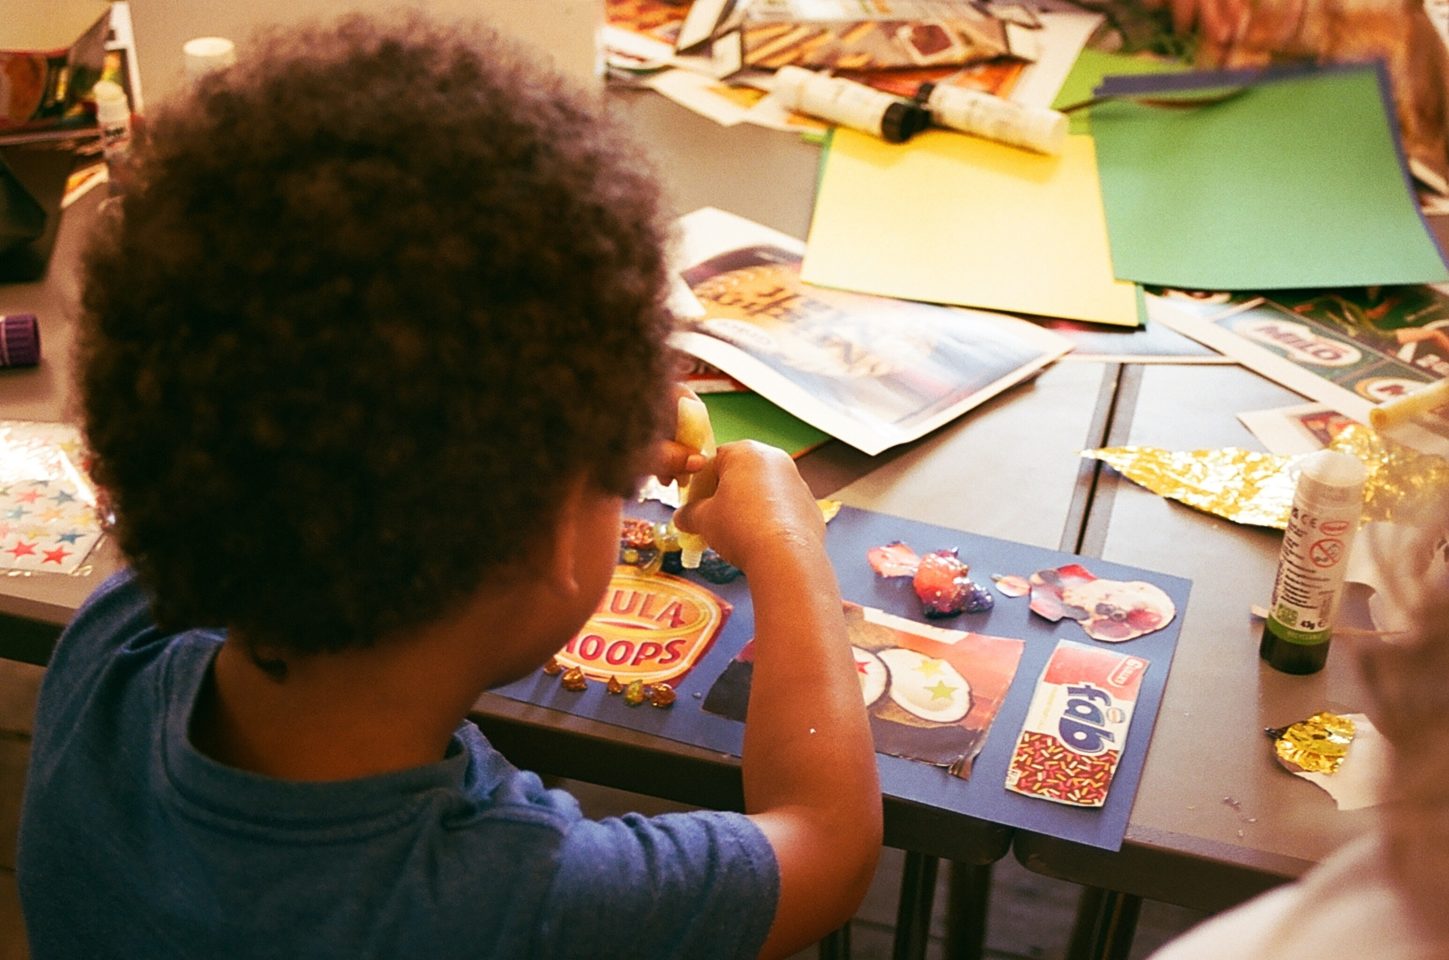 A child makes a colourful collage at a table